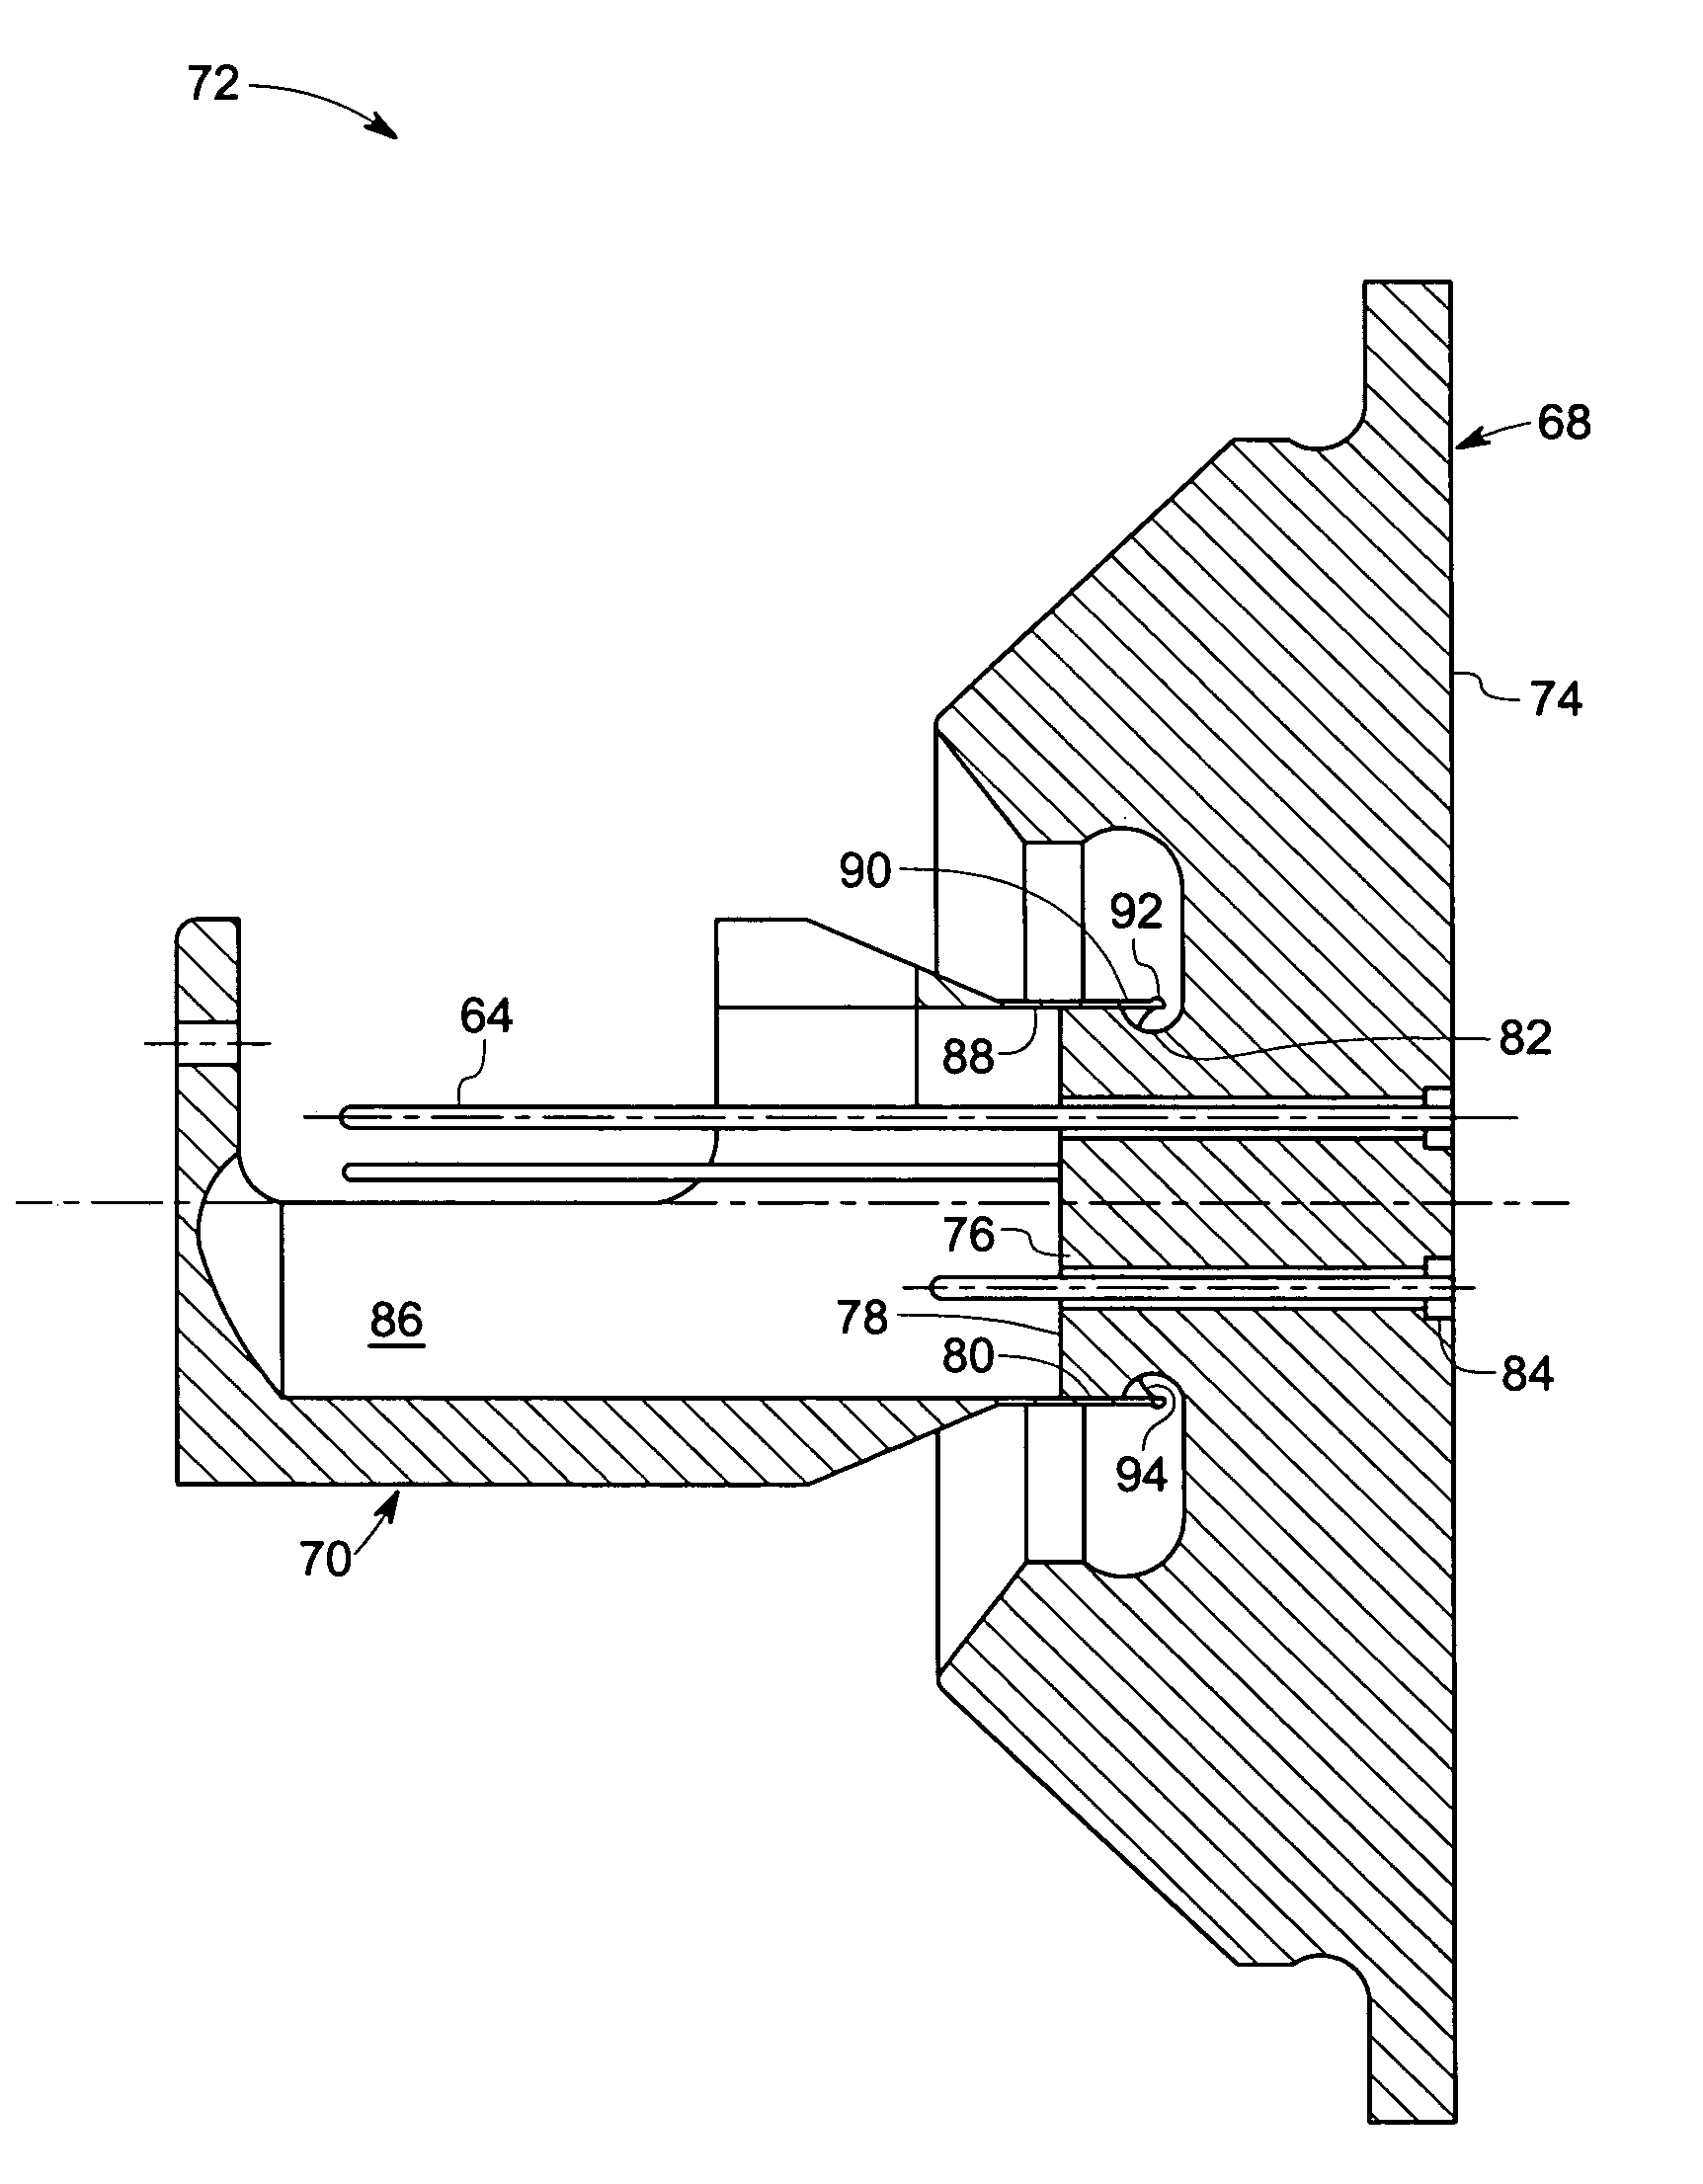 Method and design for electrical stress mitigation in high voltage insulators in X-ray tubes